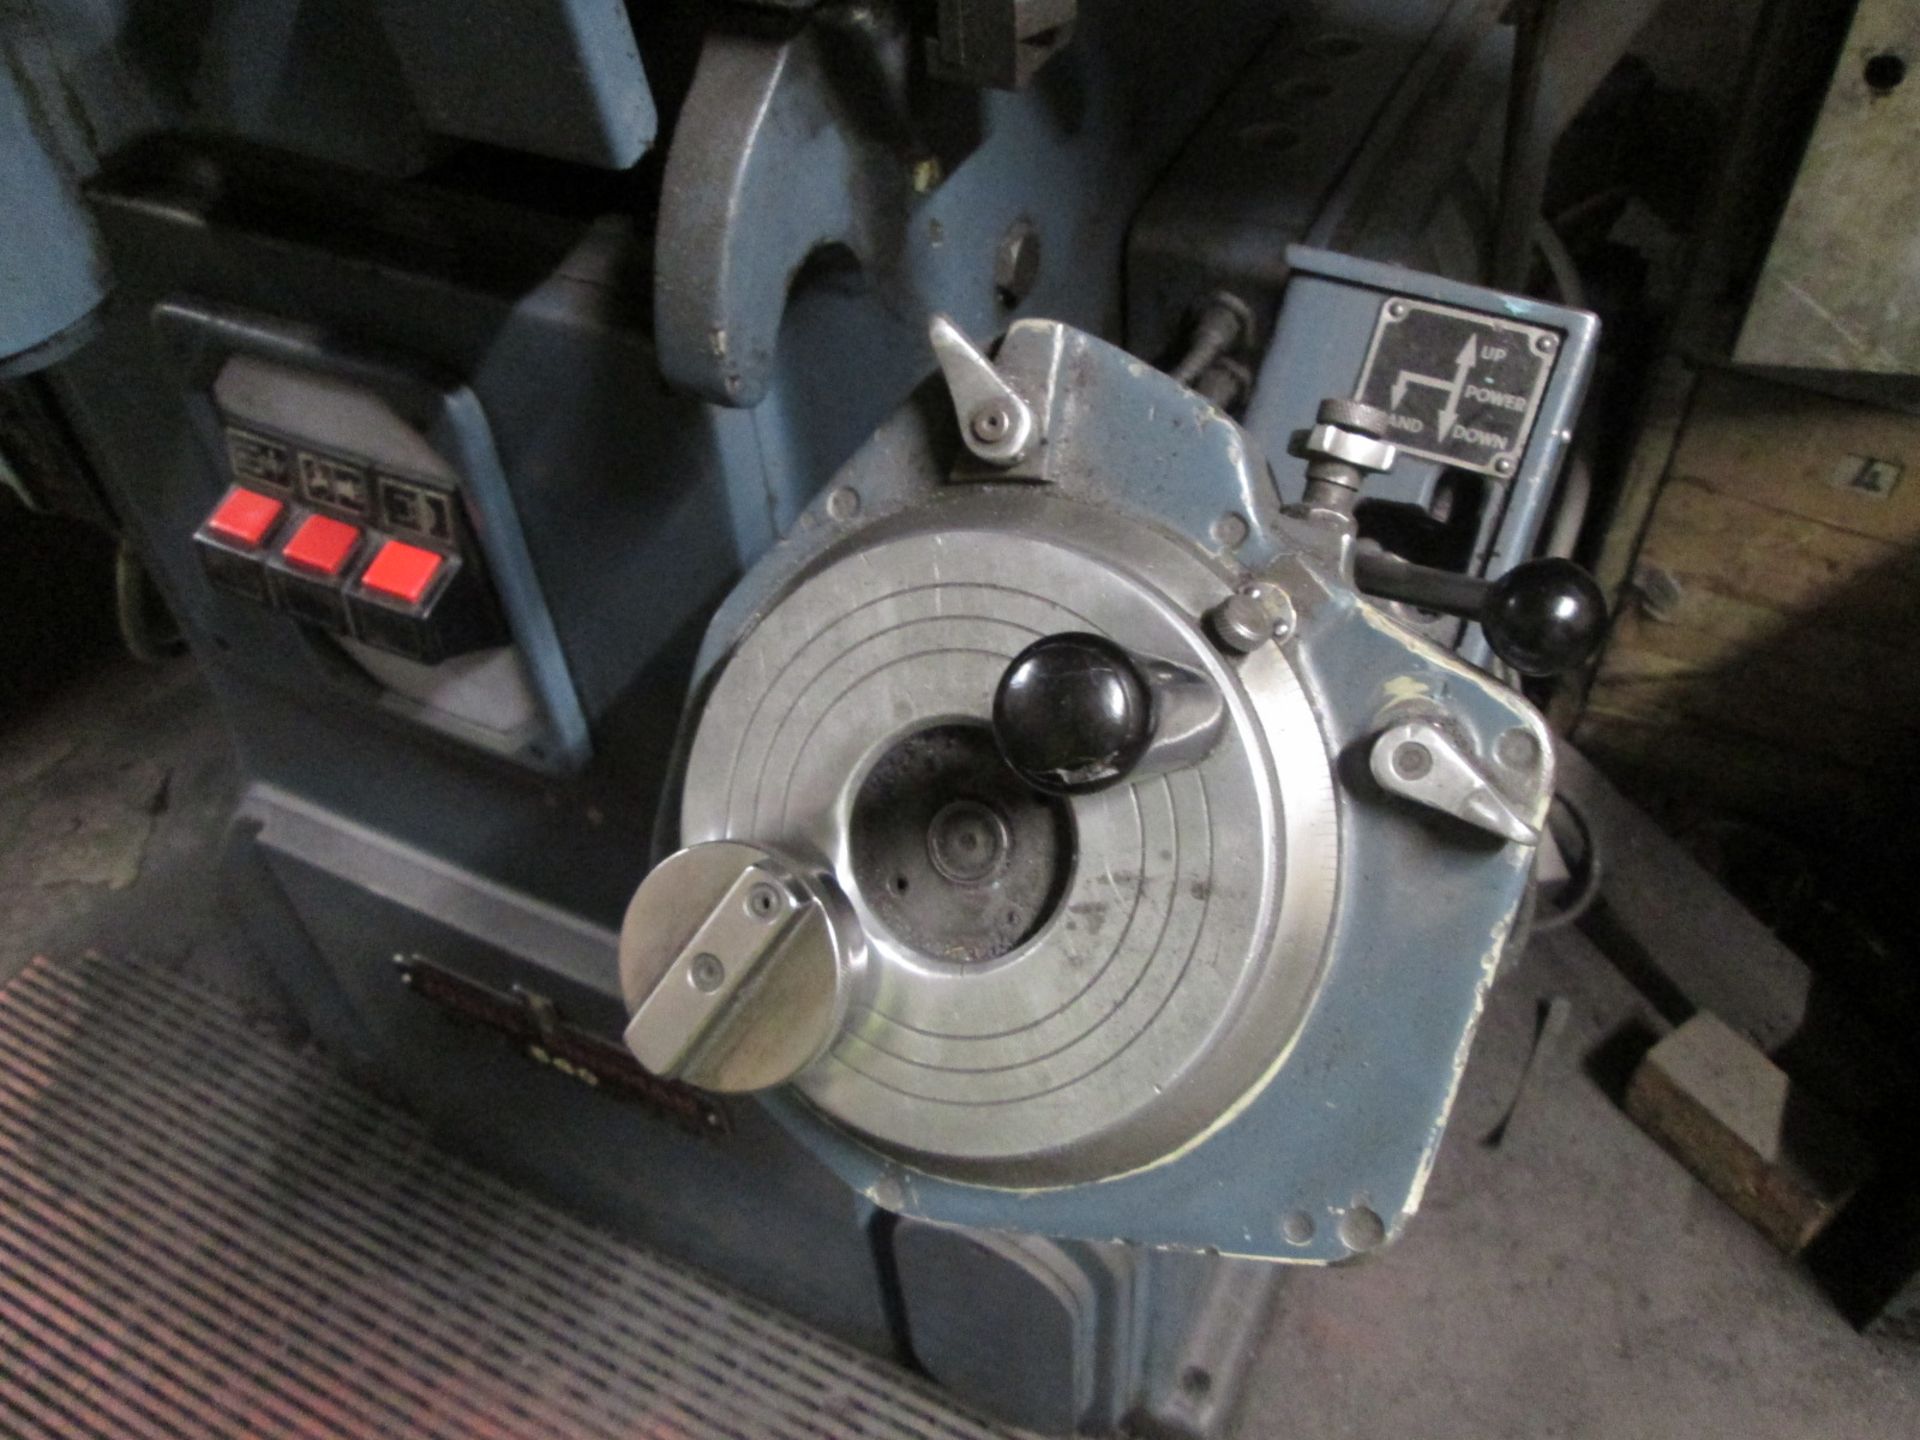 Jones & Shipman 540 Surface Grinder, Magnetic chuck size 460 mm x 150 mm, Power rise and fall work - Image 4 of 7